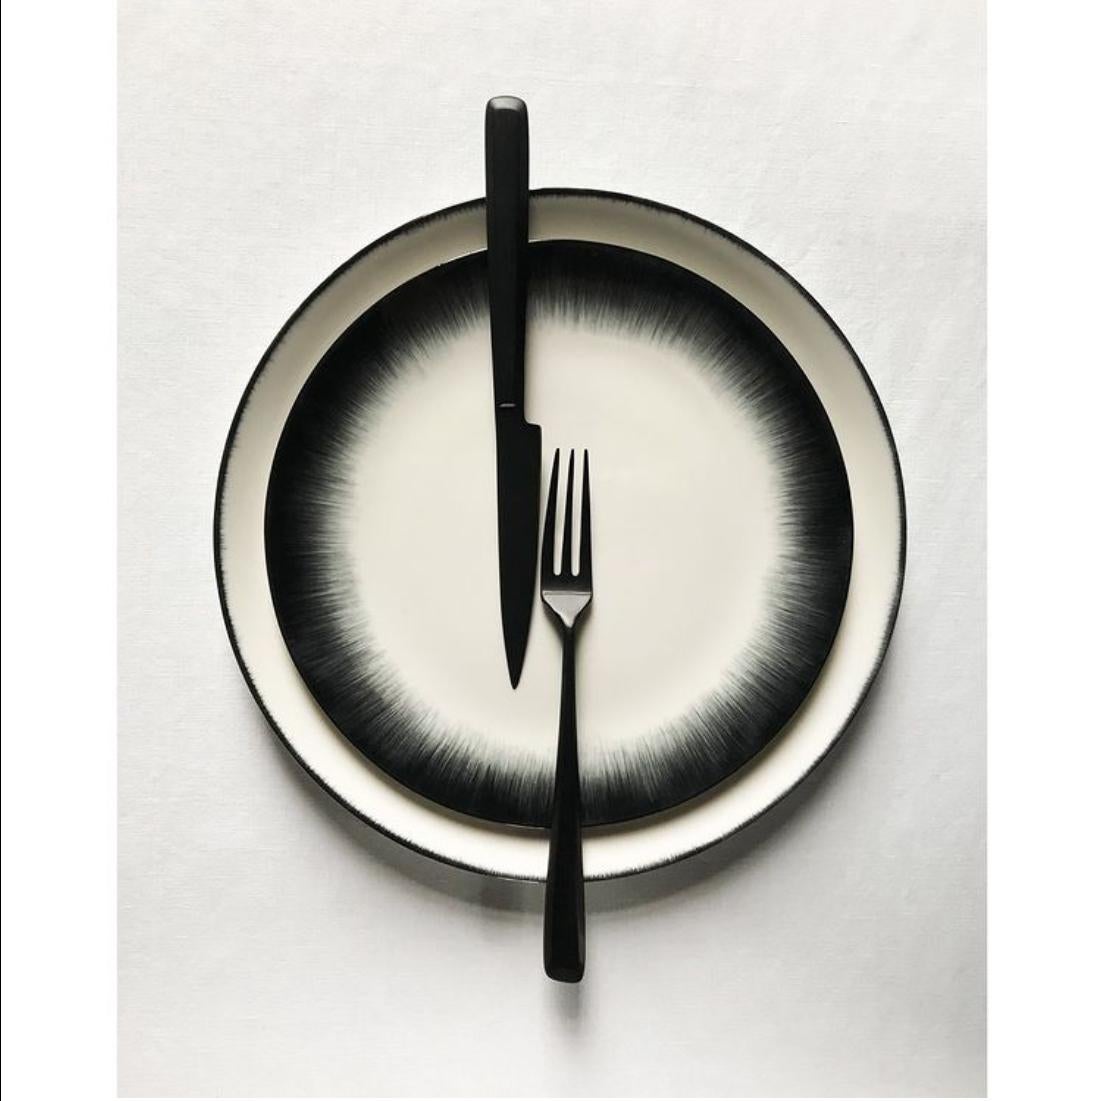 Ann Demeulemeester for Serax 24 cm plates (set of two) In New Condition For Sale In Laguna Beach, CA